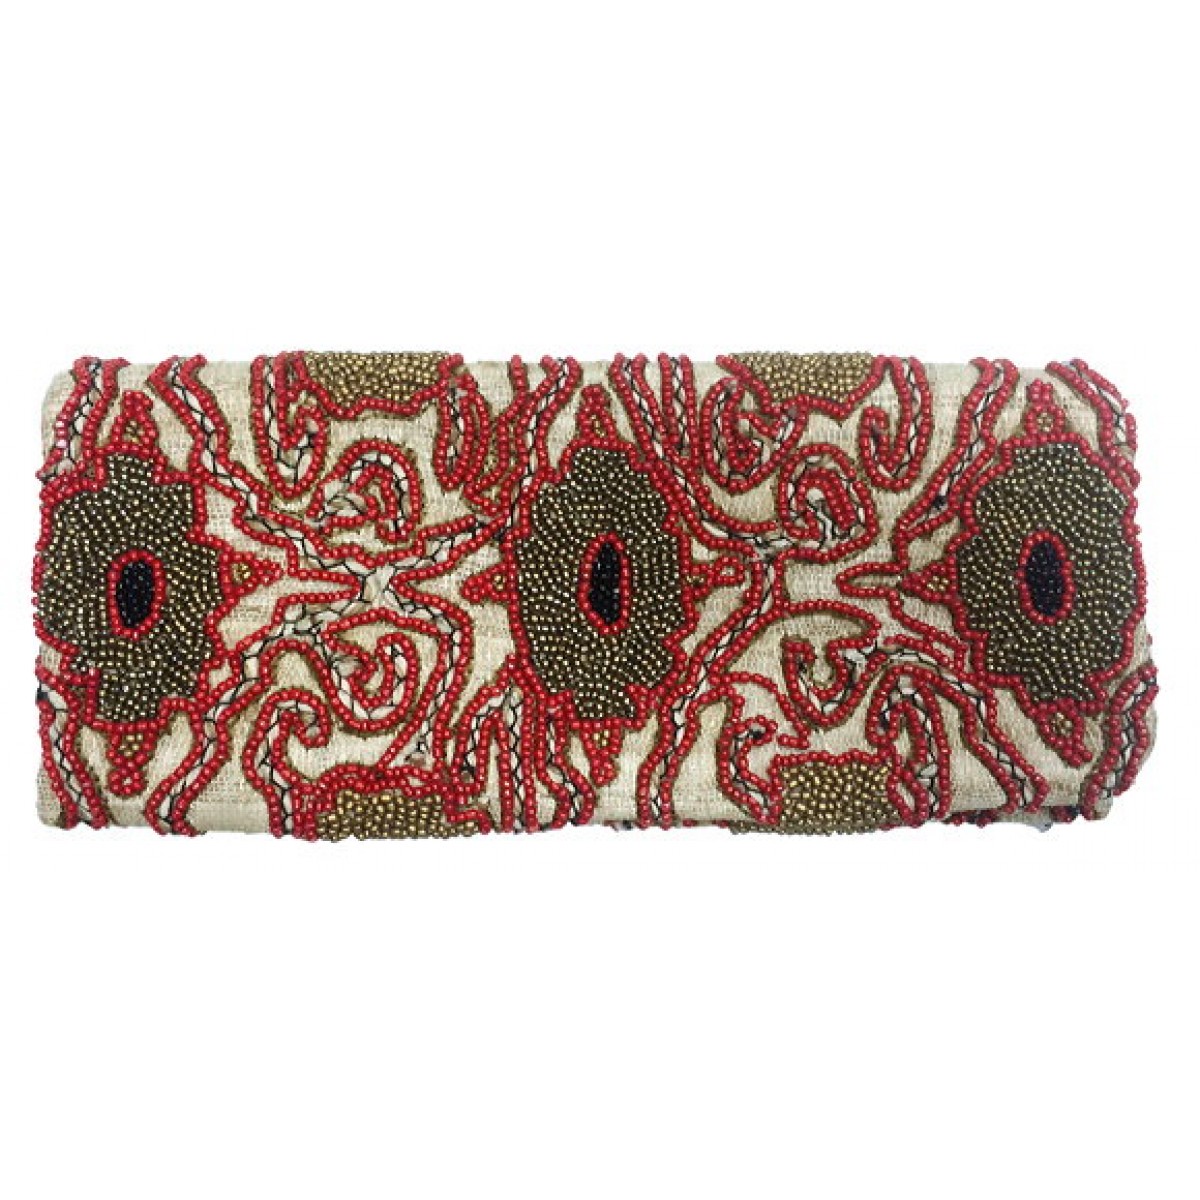 Burlap Fold over Clutch Beaded Abstract